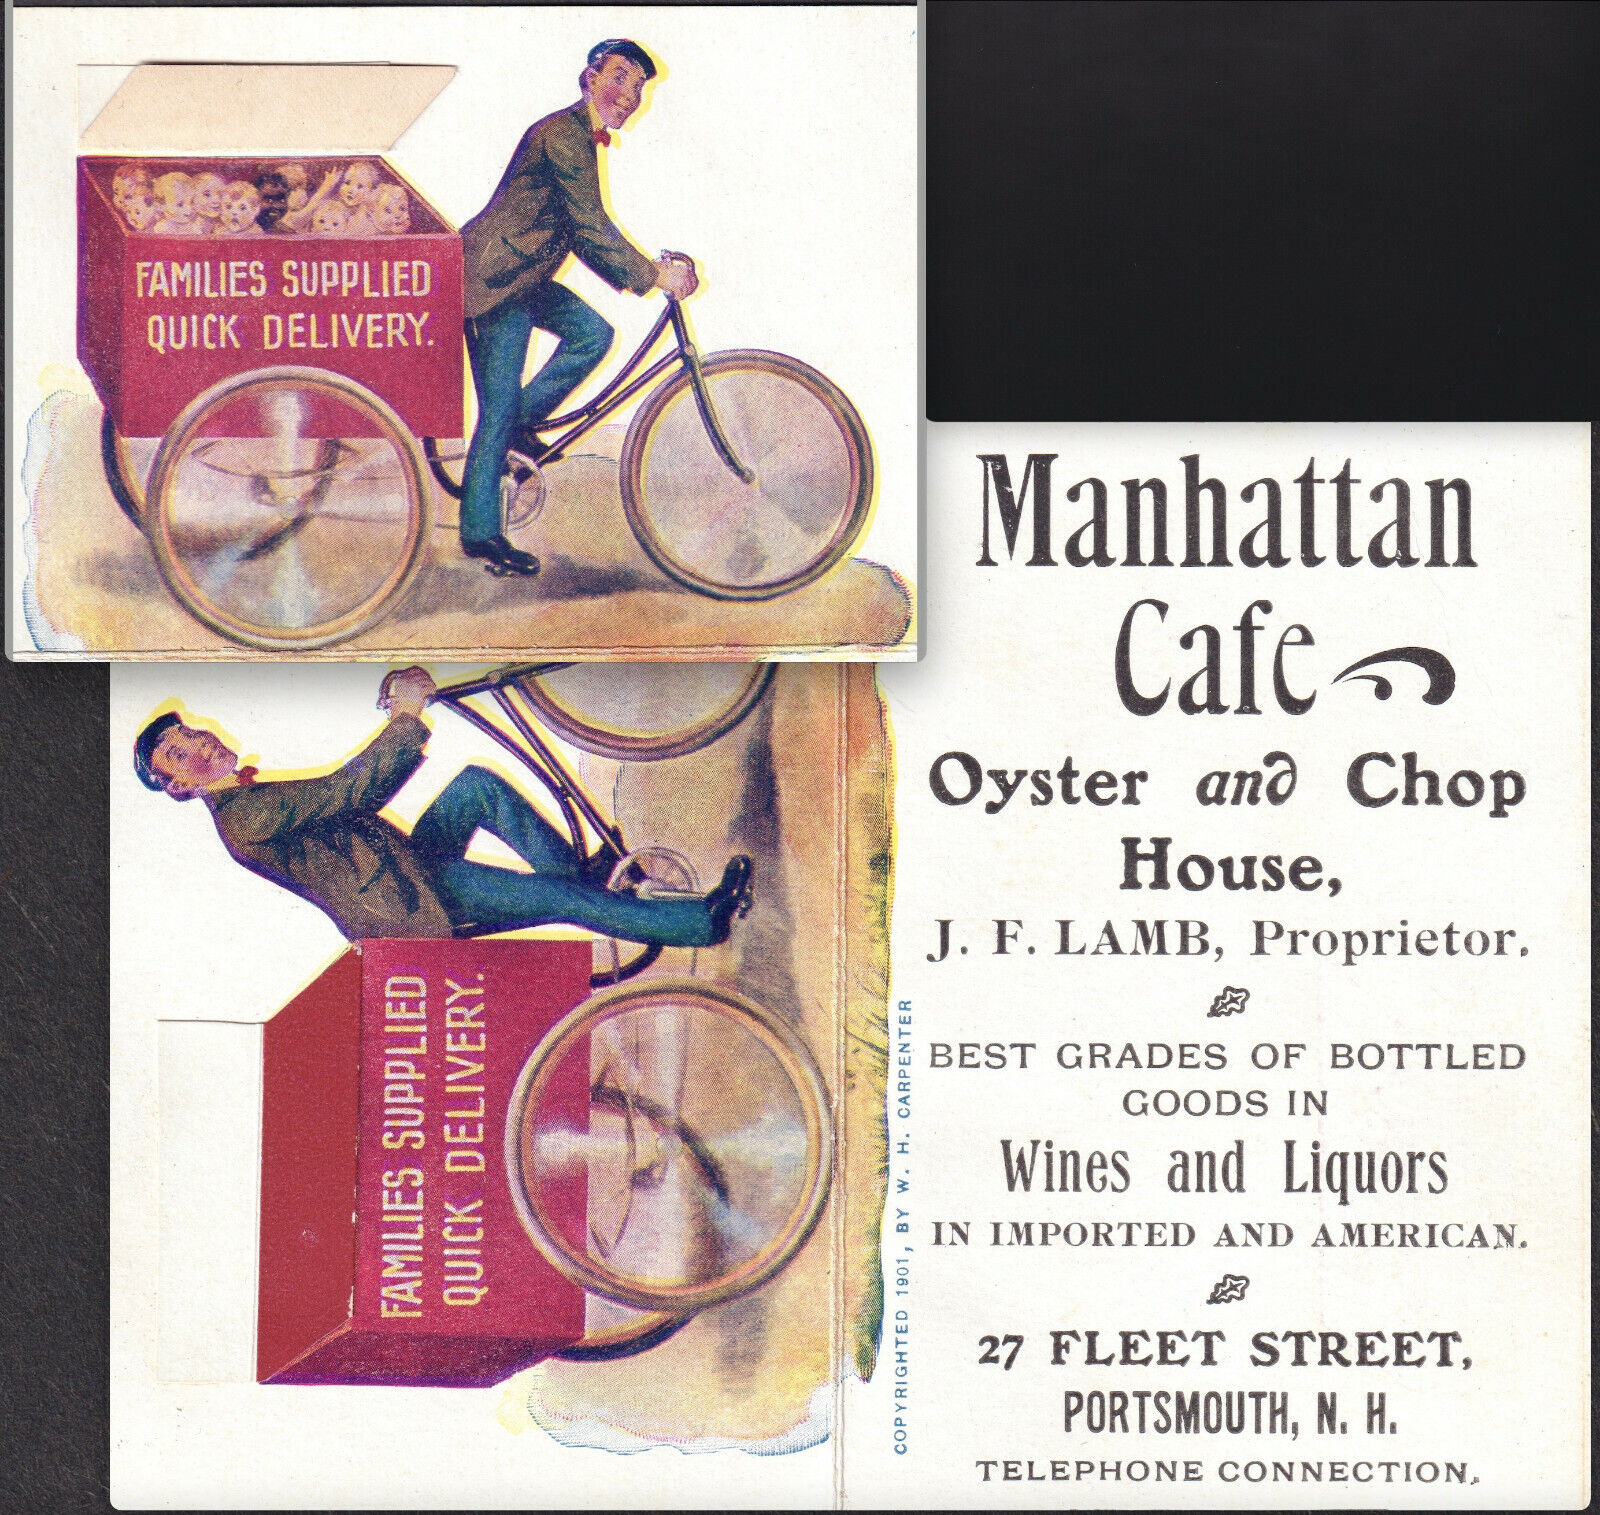 Oyster Chop House Portsmouth NH Bottle Goods Baby Delivery Bike c1901 Trade Card